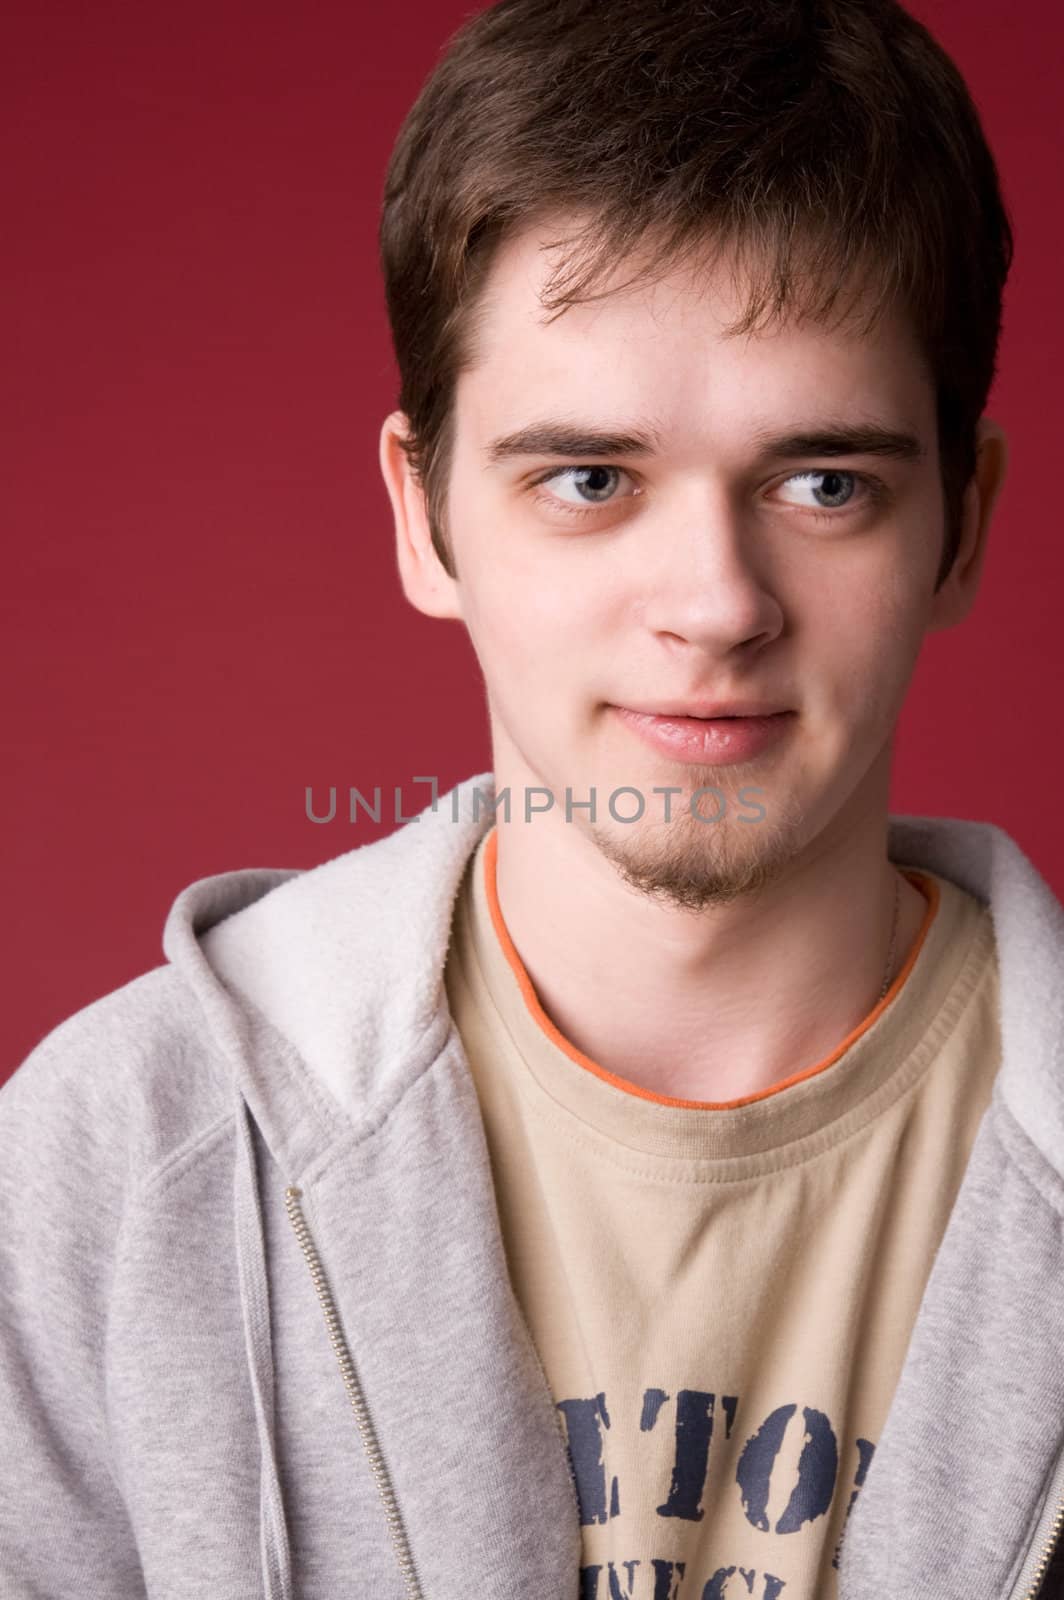 The young guy in studio on a red background